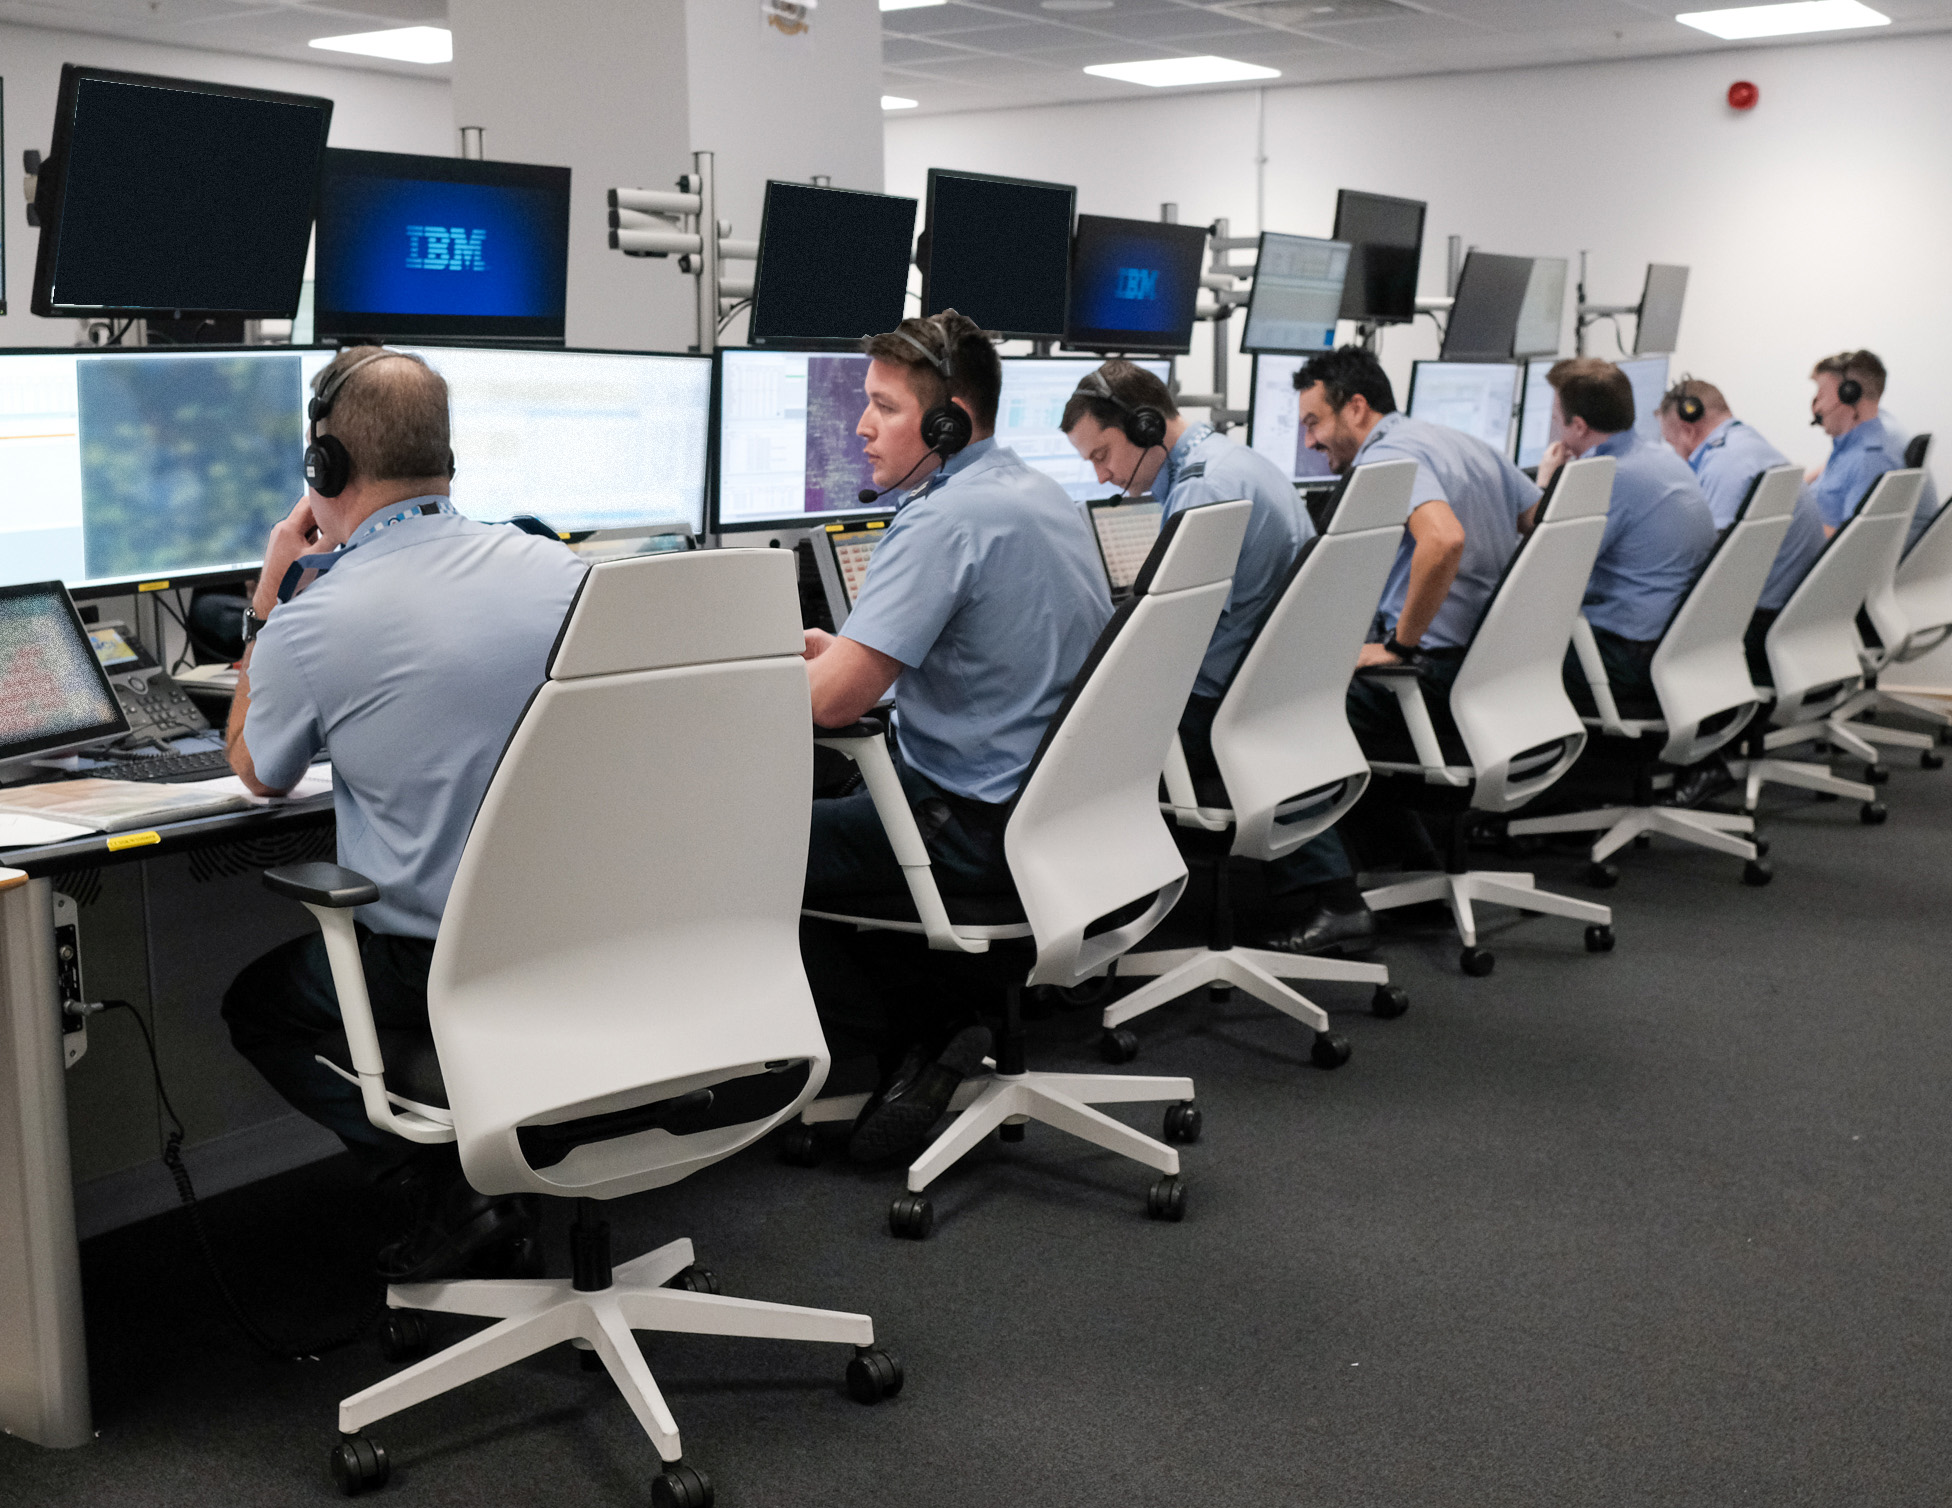 Image shows RAF aviators using computers in office.